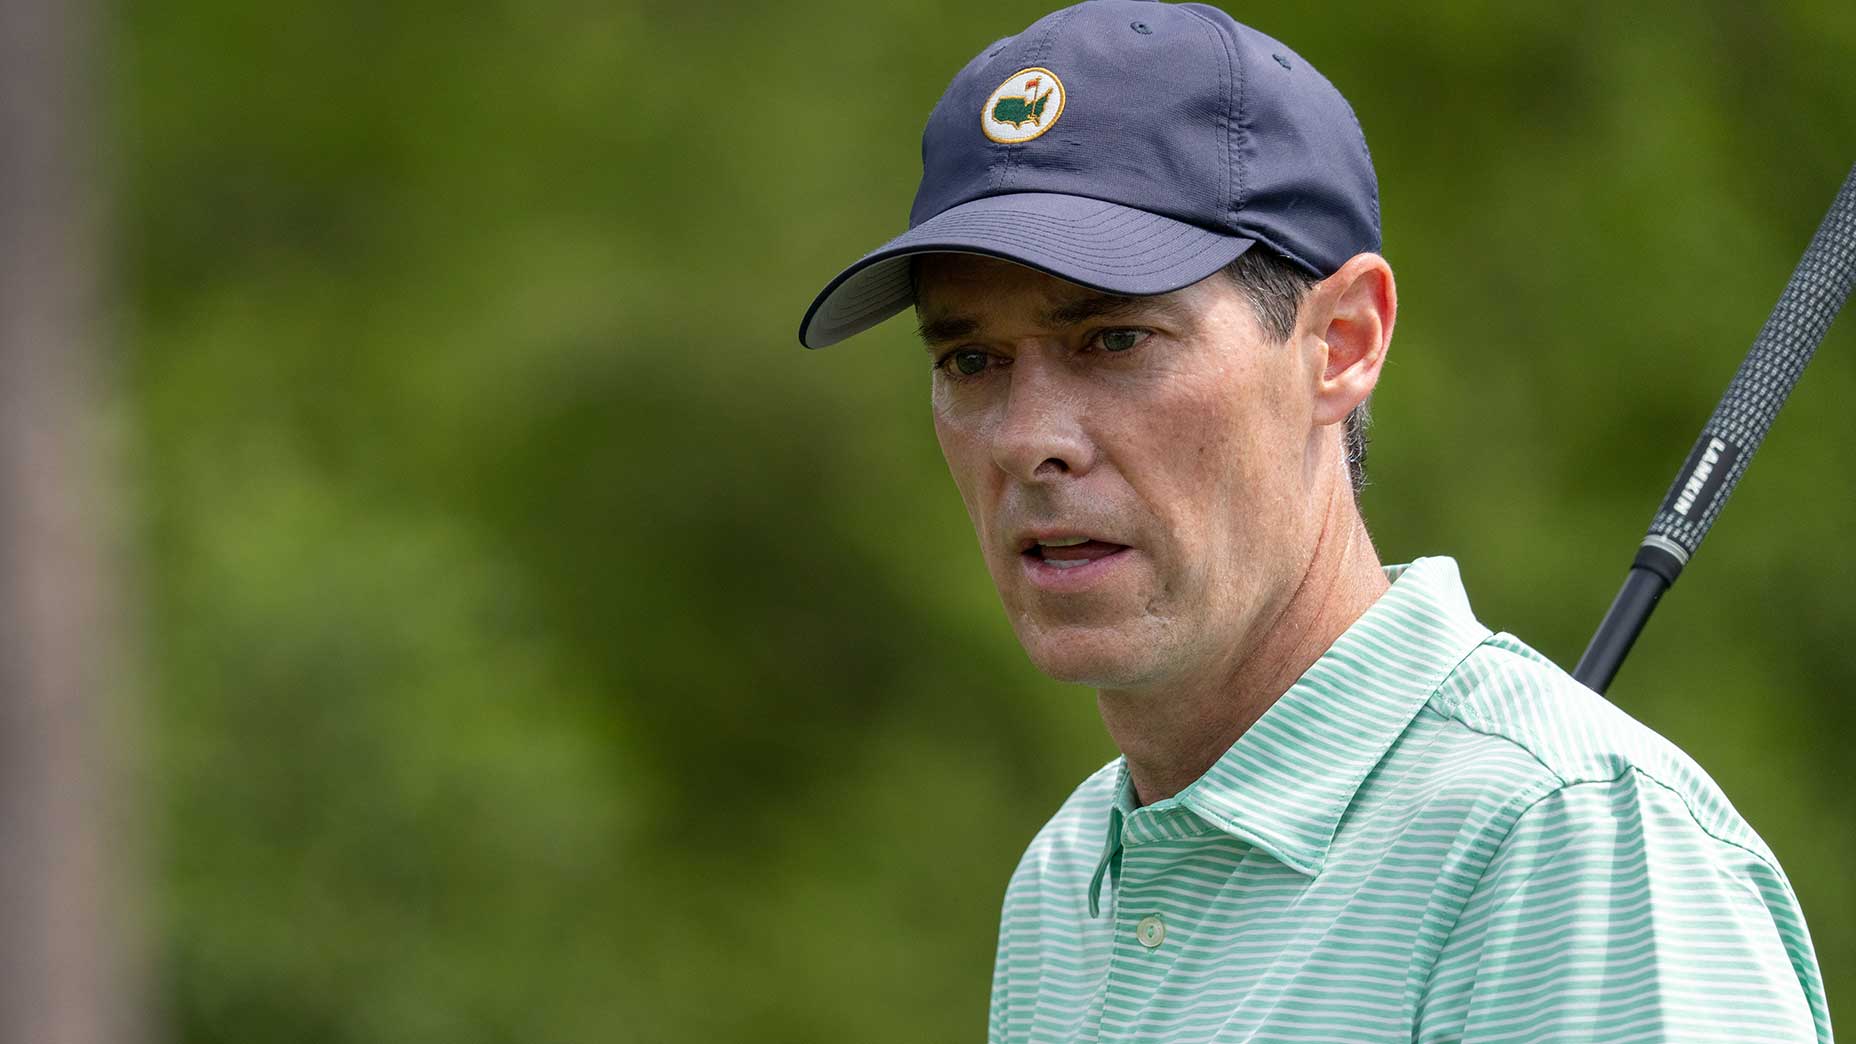 Meet the Masters’ new marker, Michael McDermott, who is living every golfer’s dream